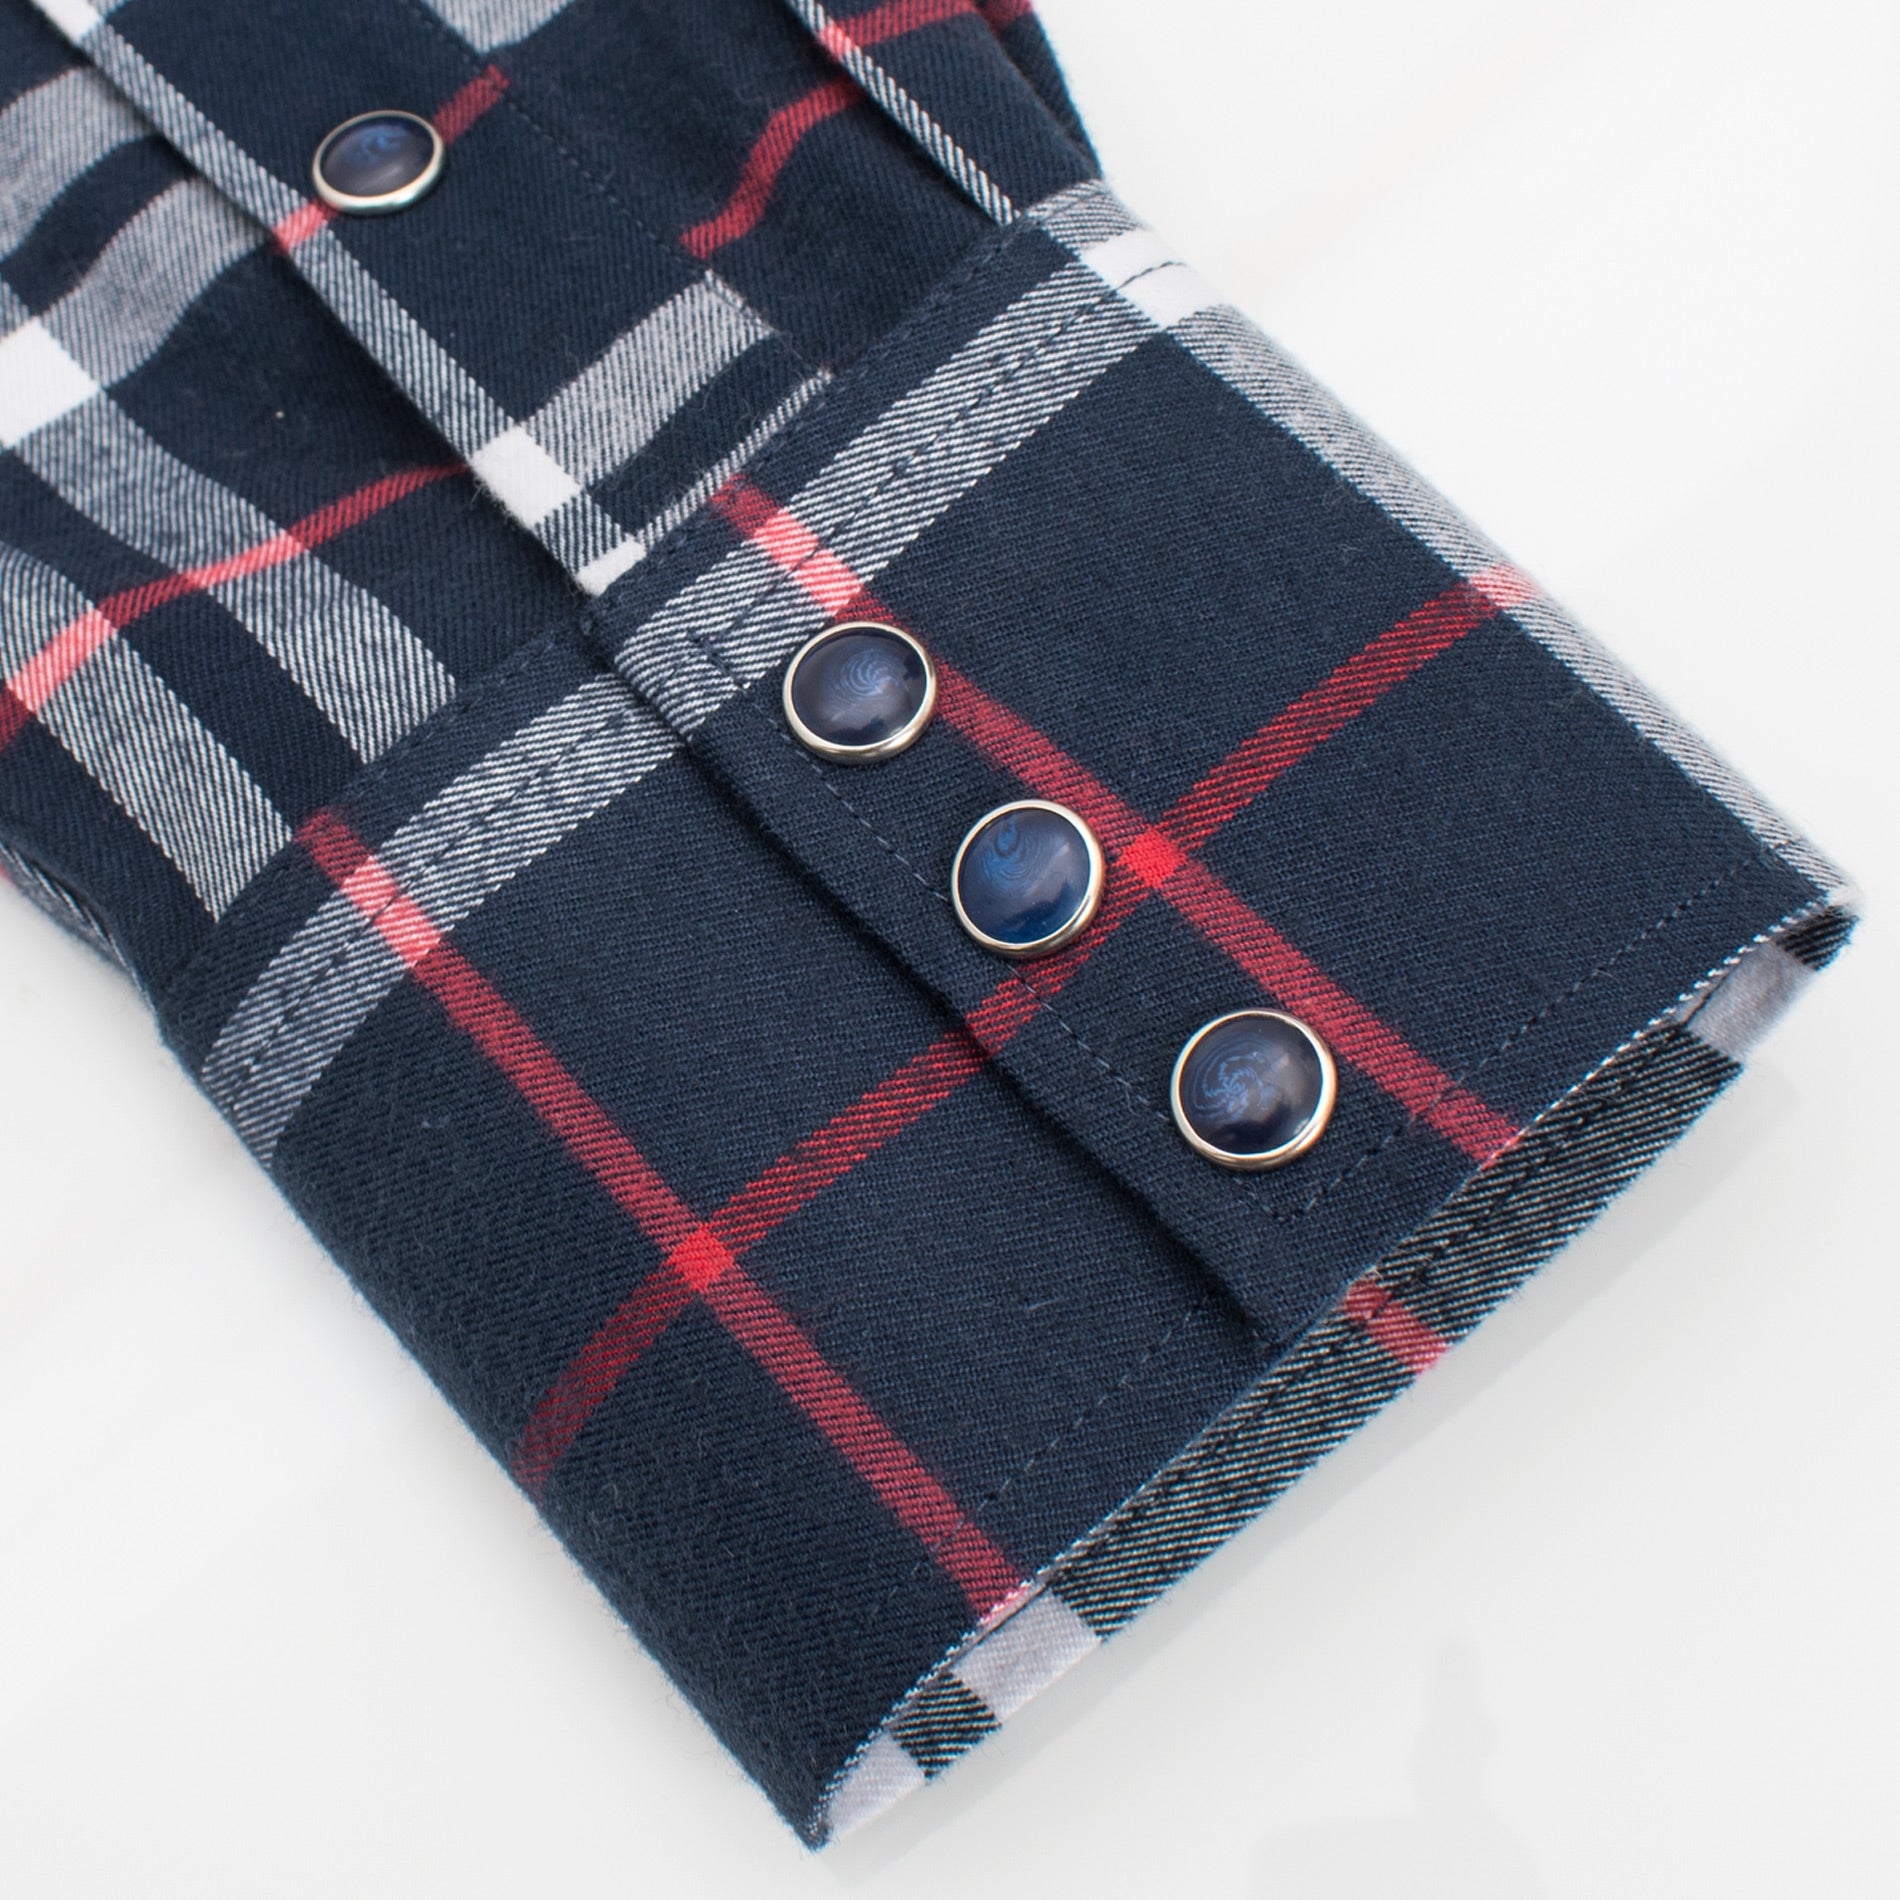 Men's Western Flannel Shirts With Snap Buttons